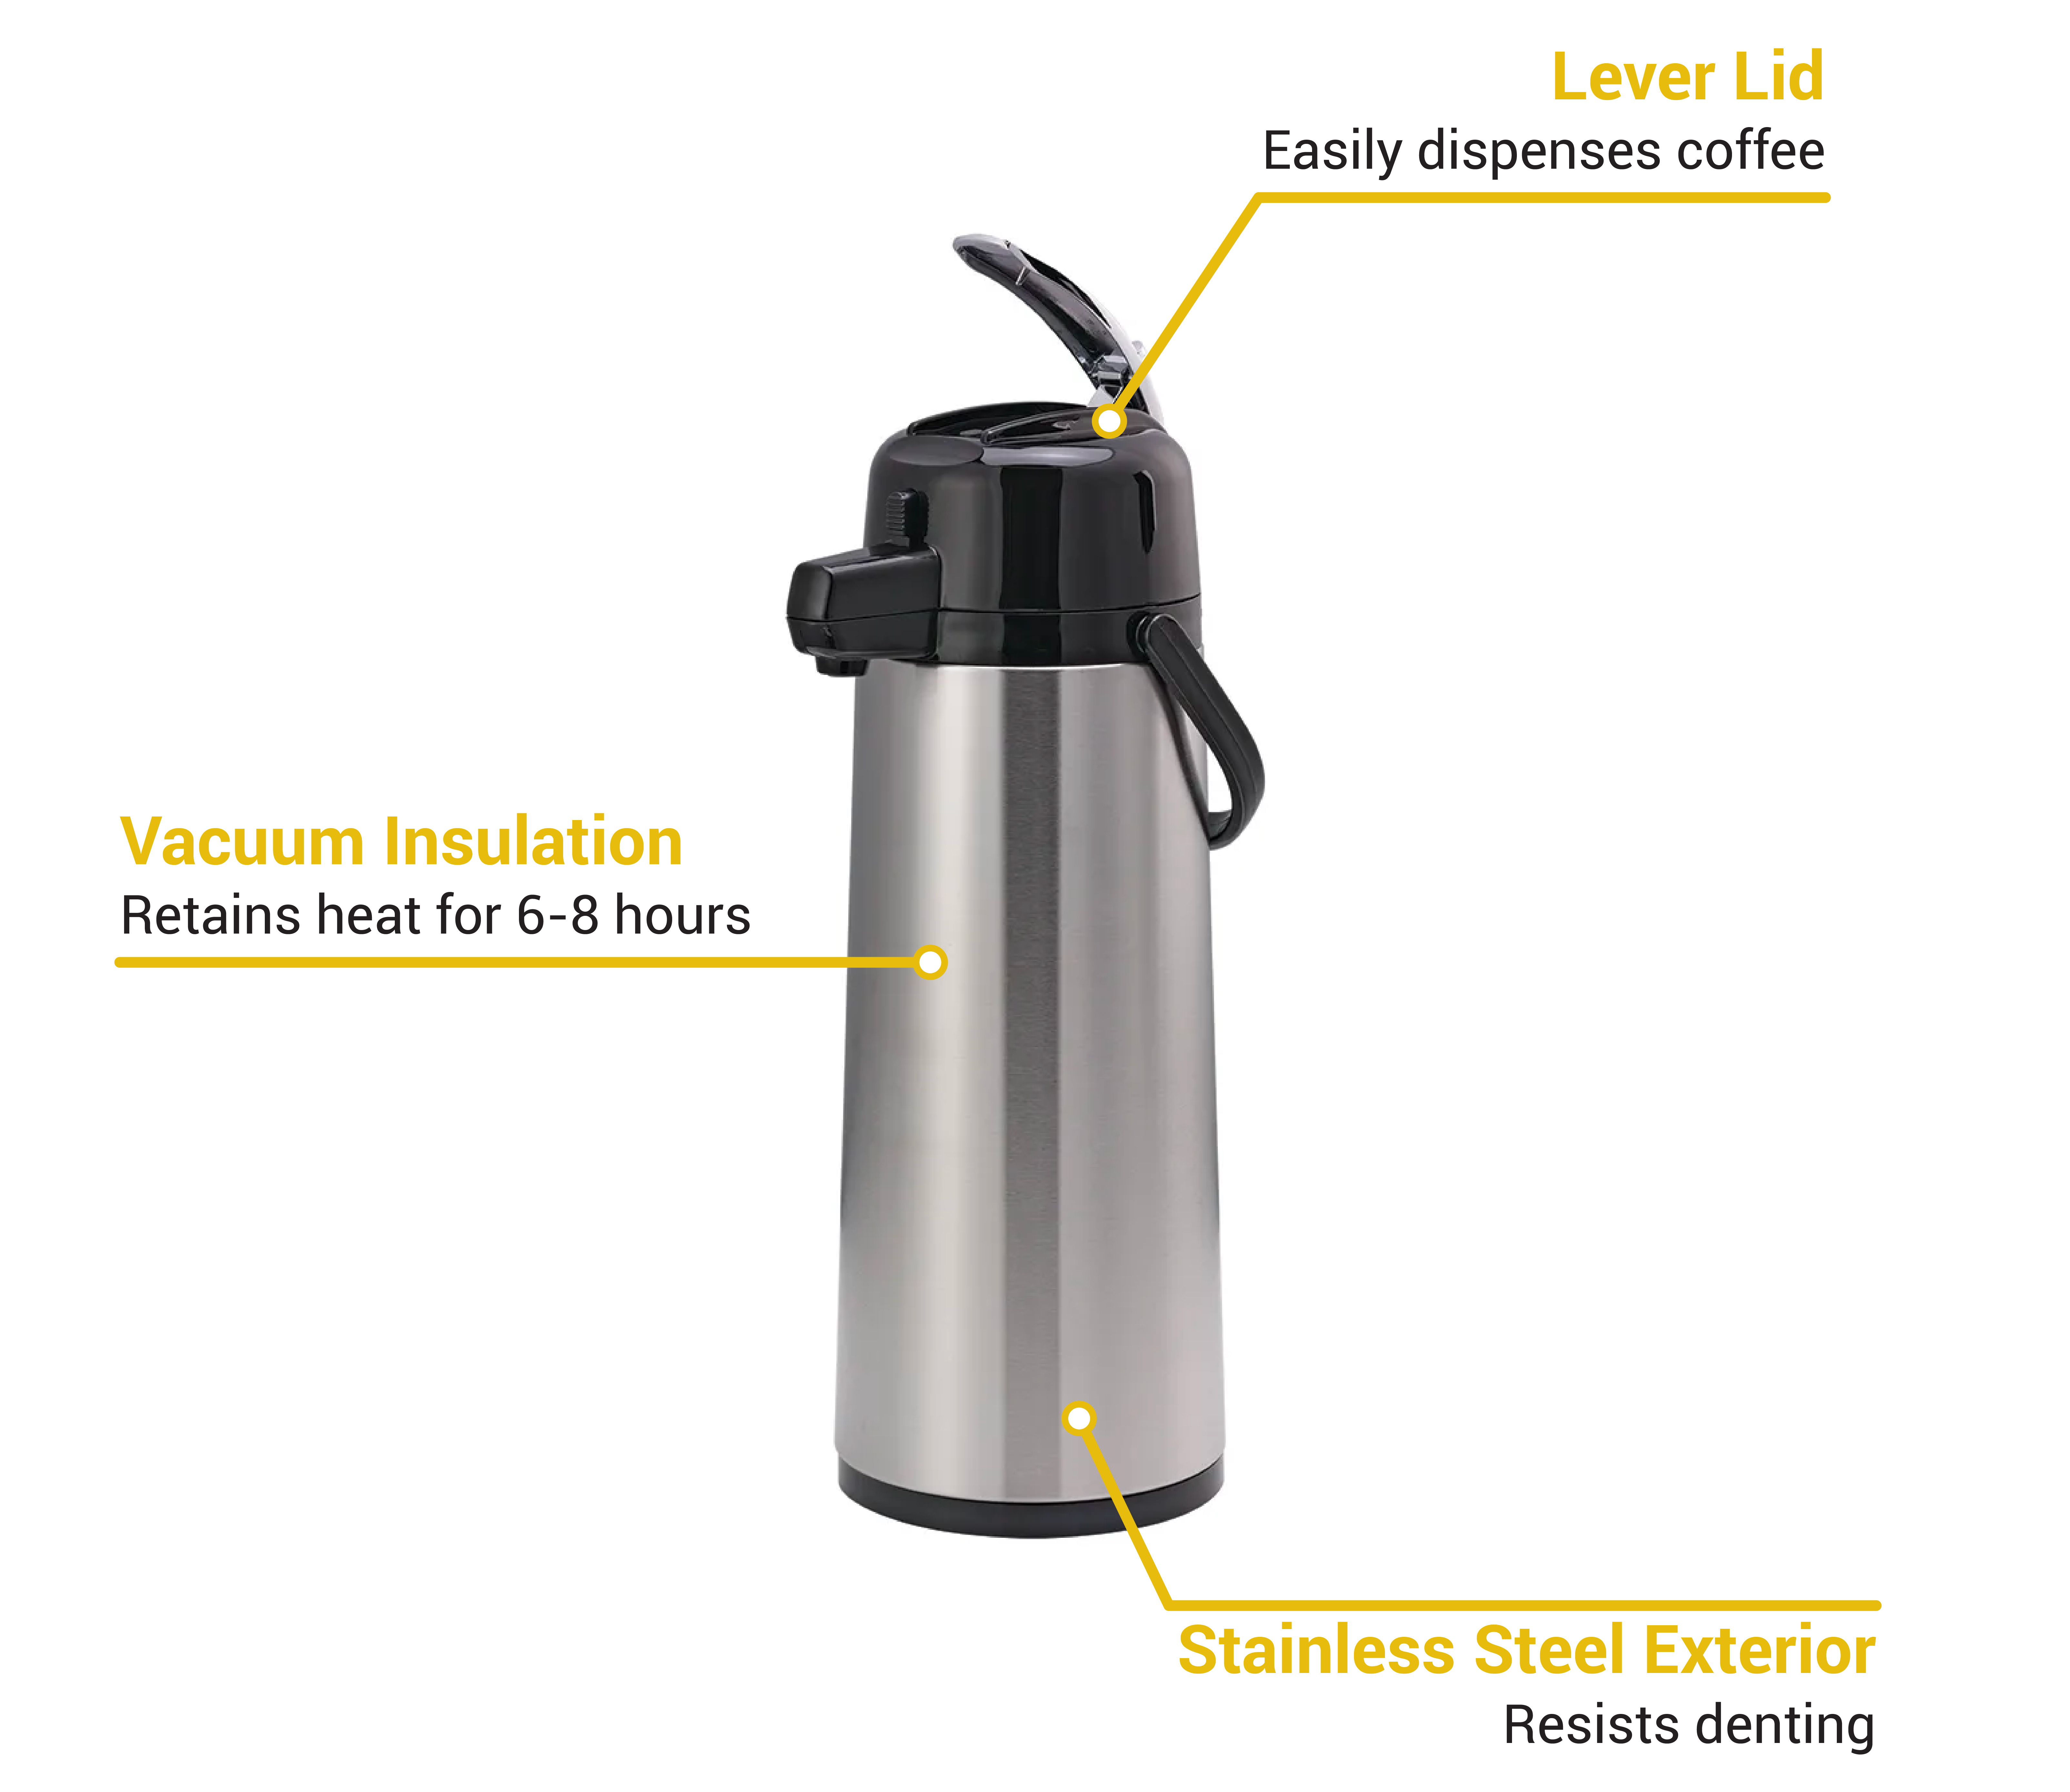 BUNN 32125.0000 2.5 Liter Lever-Action Commercial Airpot, Stainless Steel 